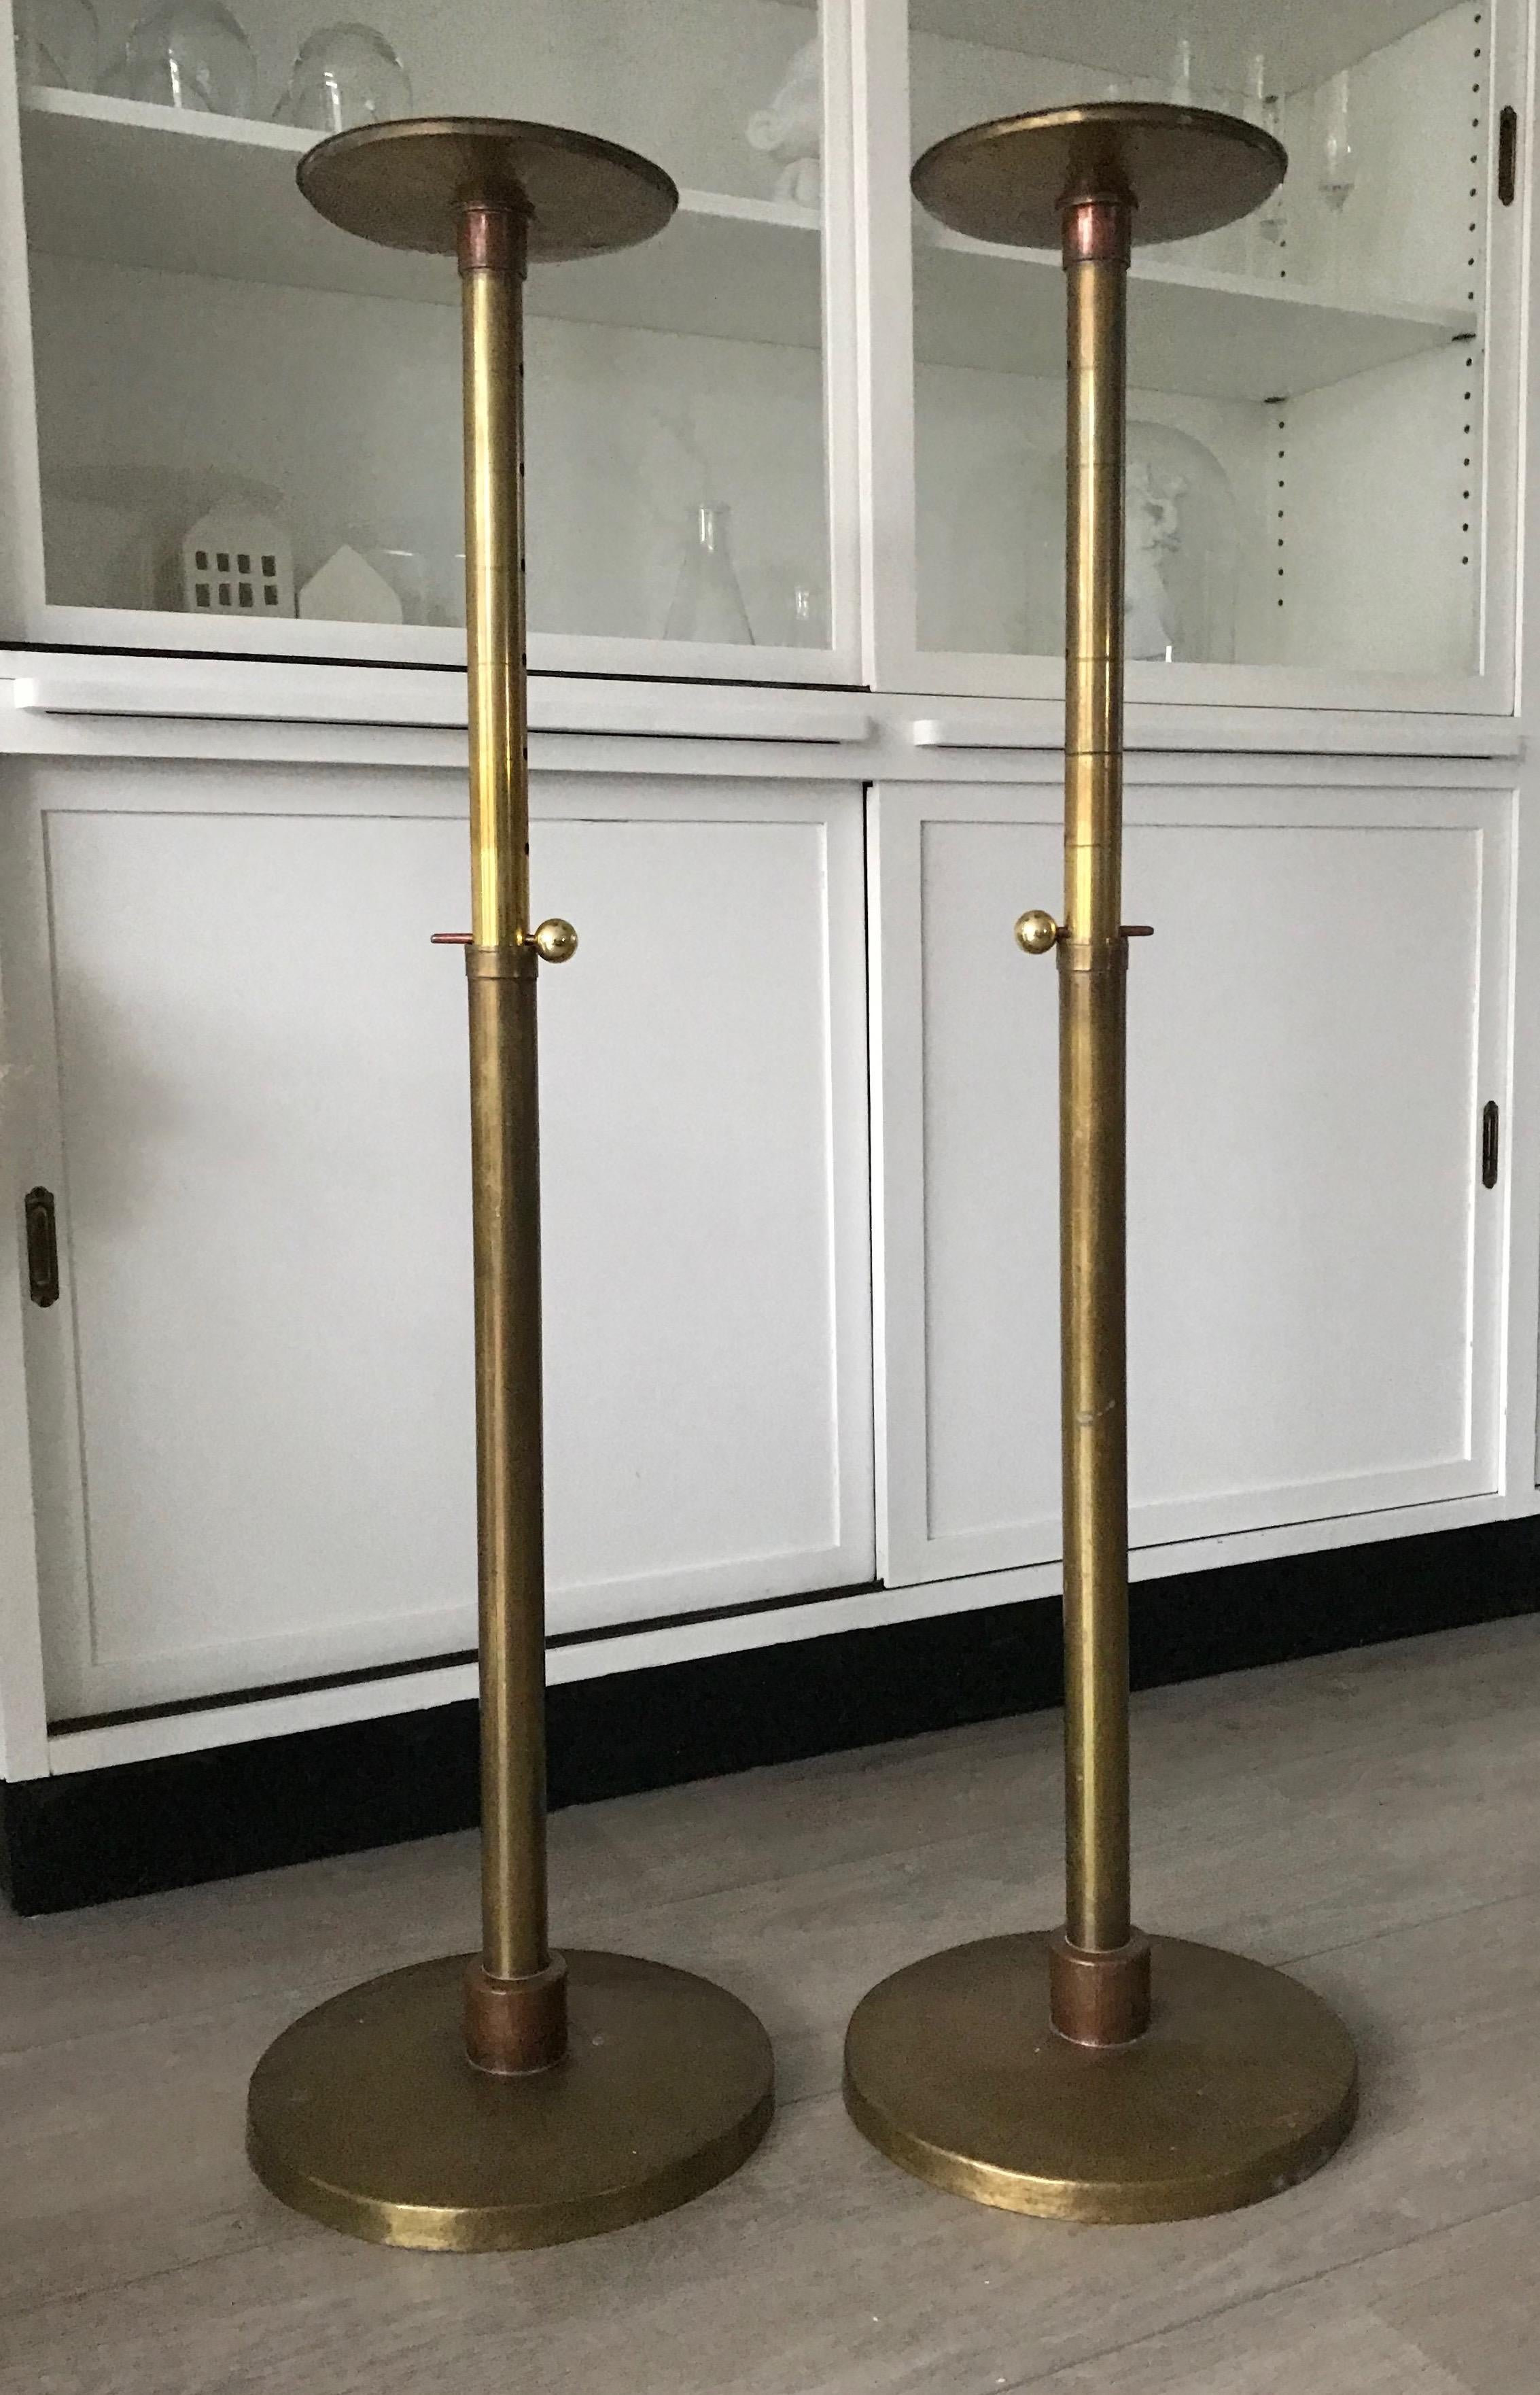 Identical, practical and quality crafted pair of adjustable pedestals.

This top quality pair of former Church stands was all hand-crafted around the turn of the century. This is also why the brass and copper now have the most incredible patina.